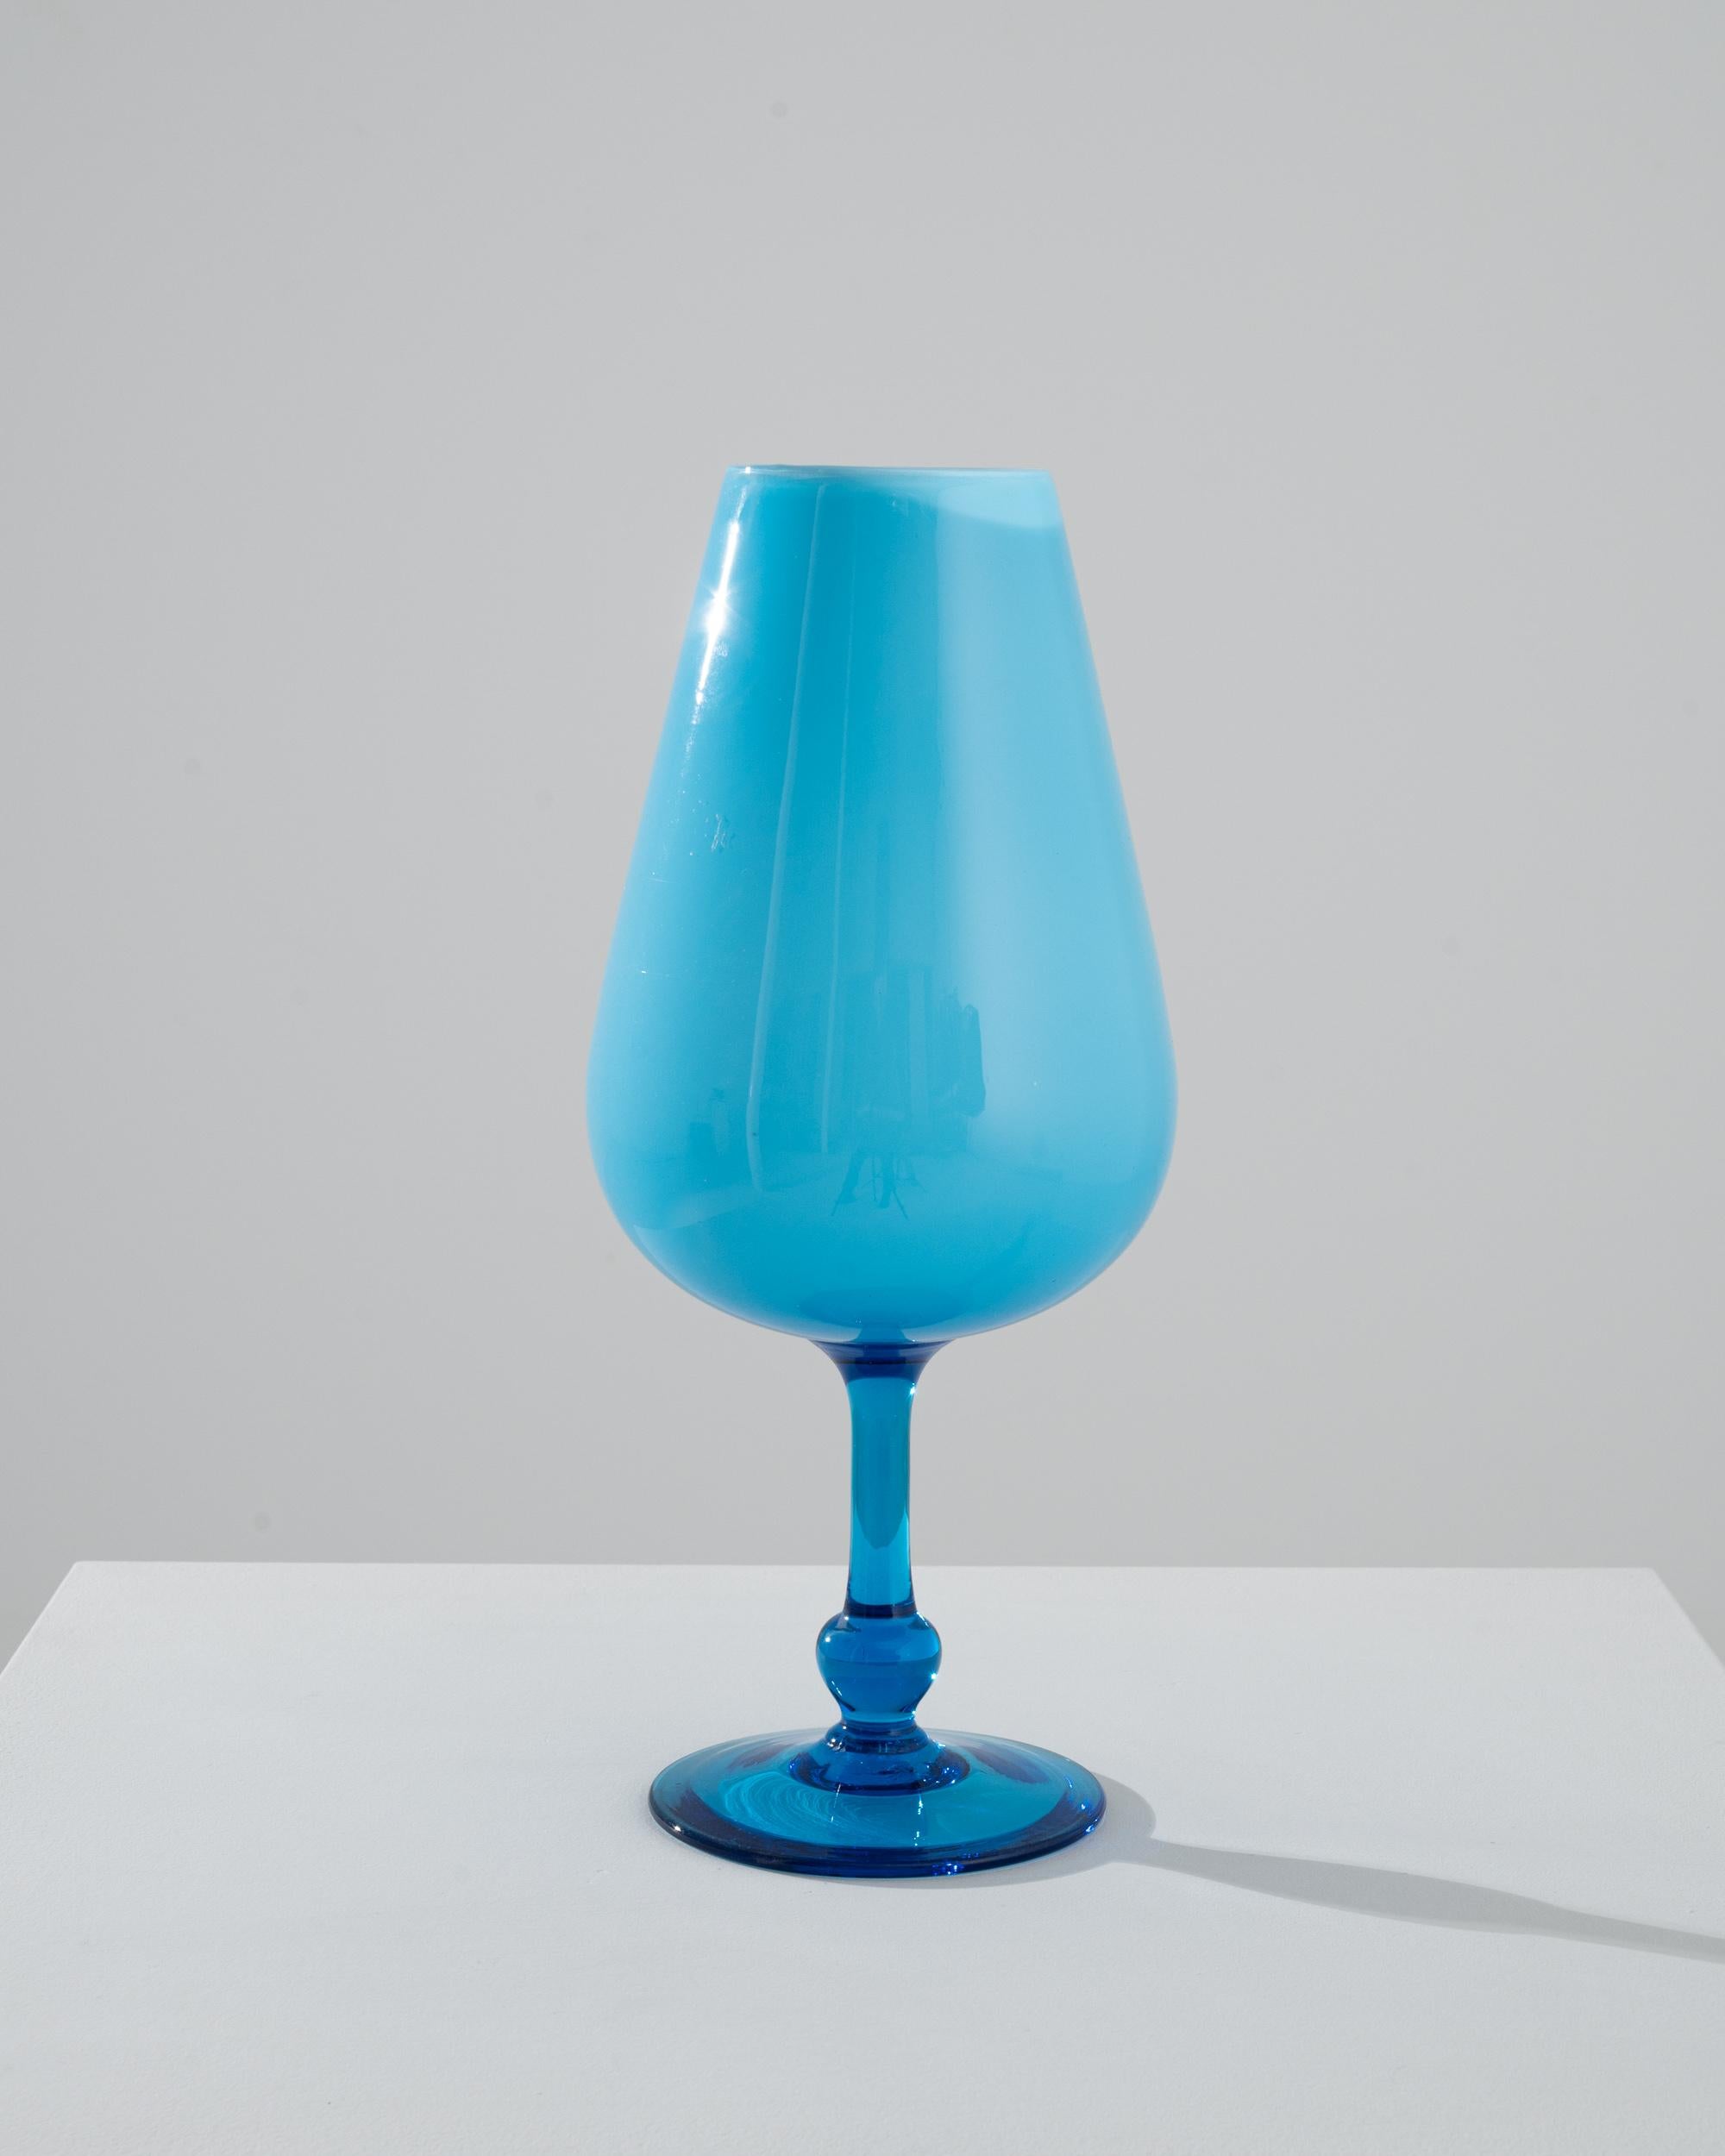 Romantic and striking, this glass goblet offers a unique vintage accent. Made in Italy in the 1960s, the shape is elegant and piercing: the articulated translucent blue foot gracefully merges with the opaque colored glass vessel. Beautifully